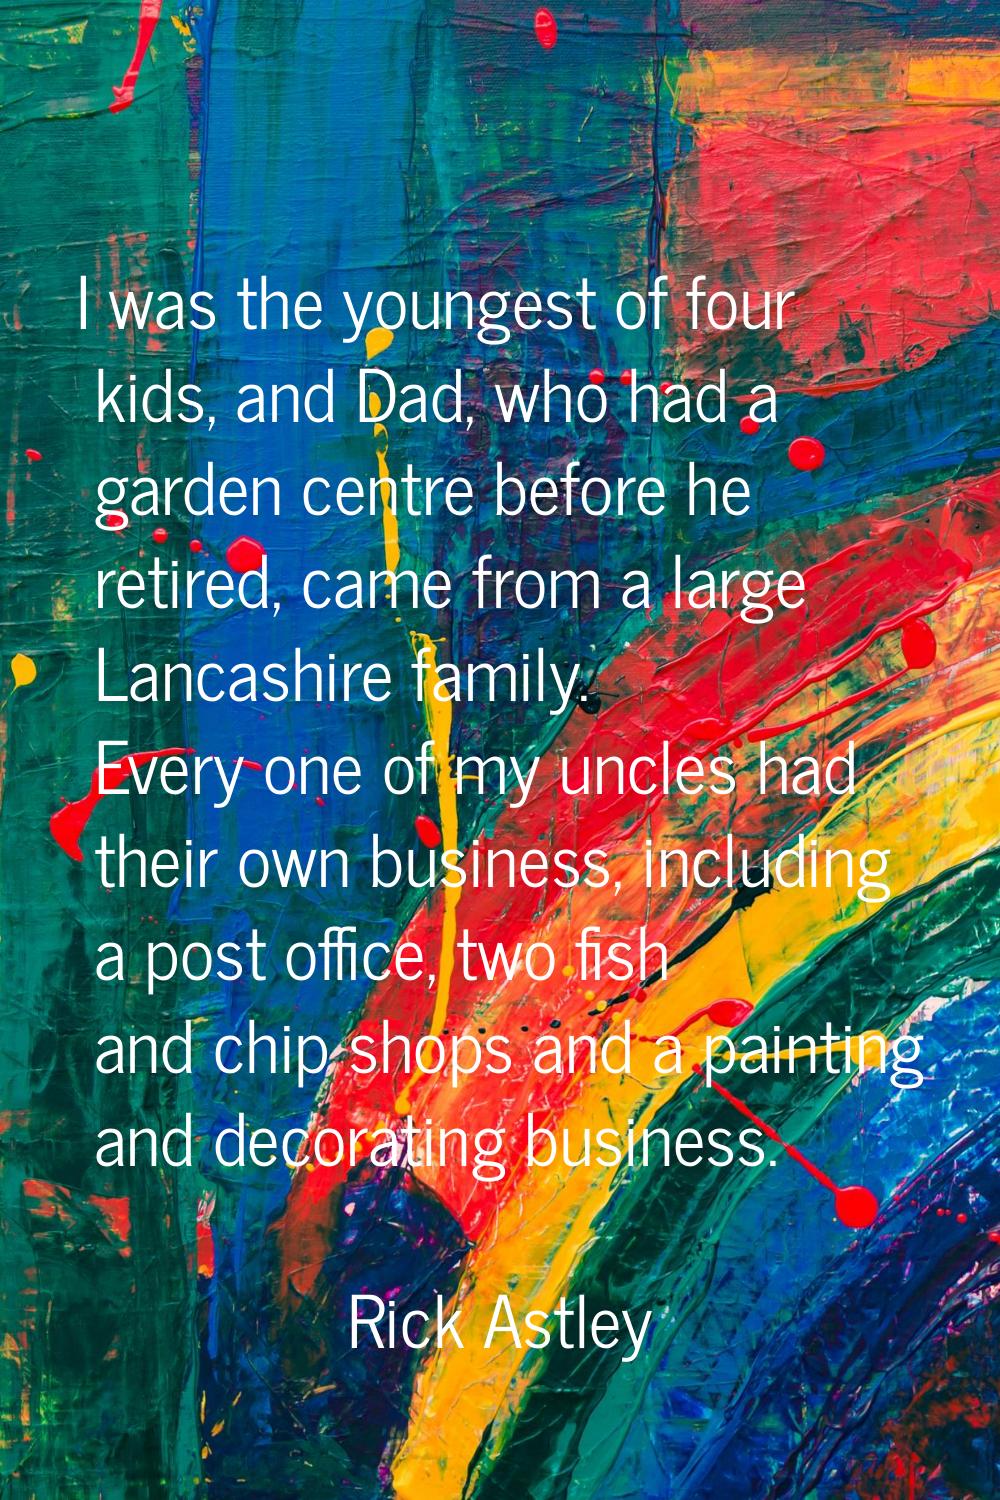 I was the youngest of four kids, and Dad, who had a garden centre before he retired, came from a la